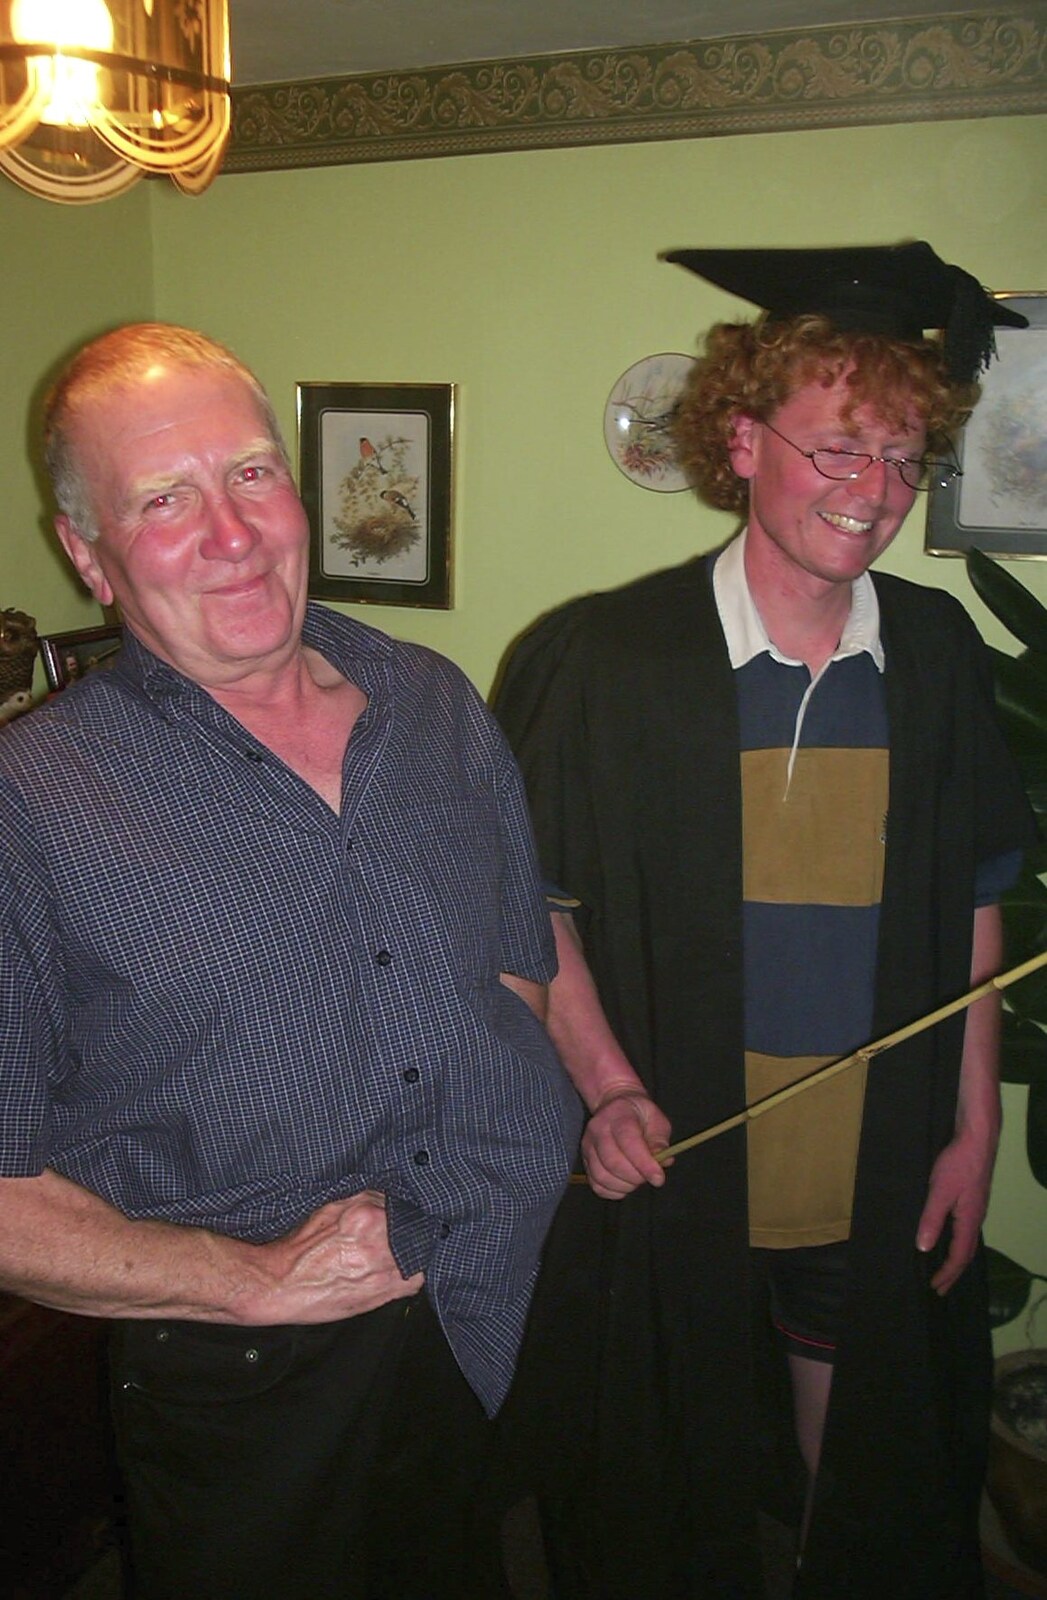 John Willy gets ready to be caned from Jenny's School Disco, Thrandeston, Suffolk - 17th May 2003